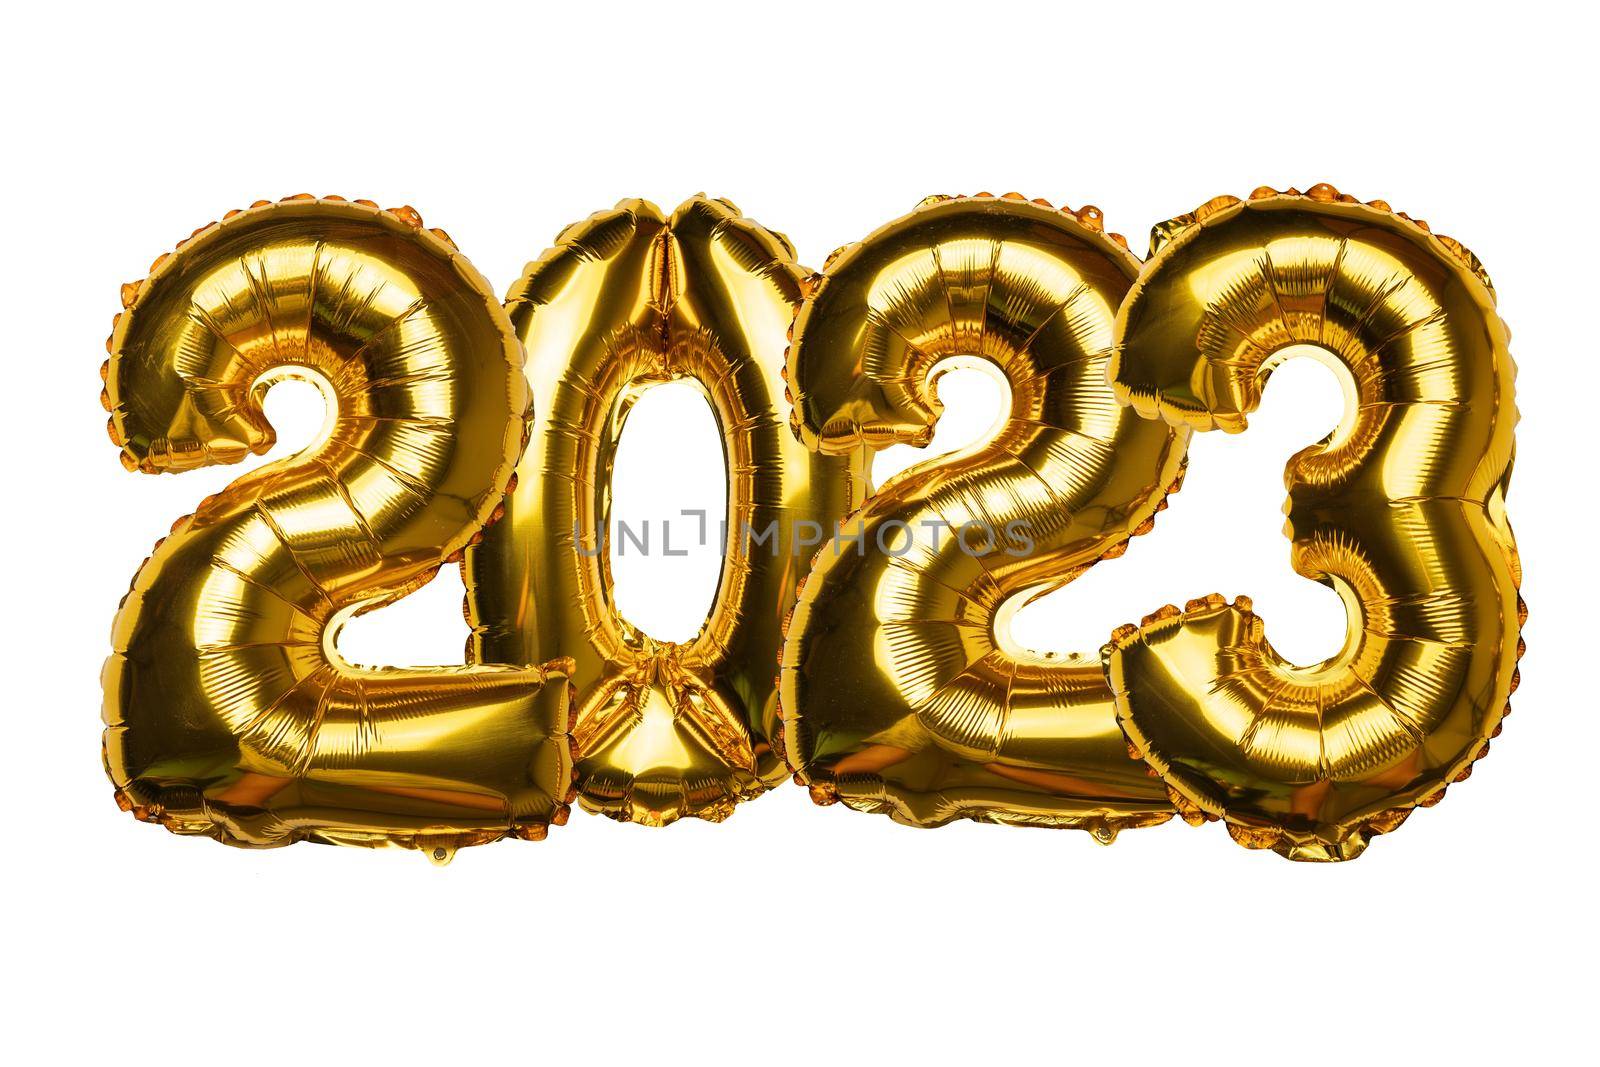 2023 Happy New Year concept from tight aranged balloon on white by adamr